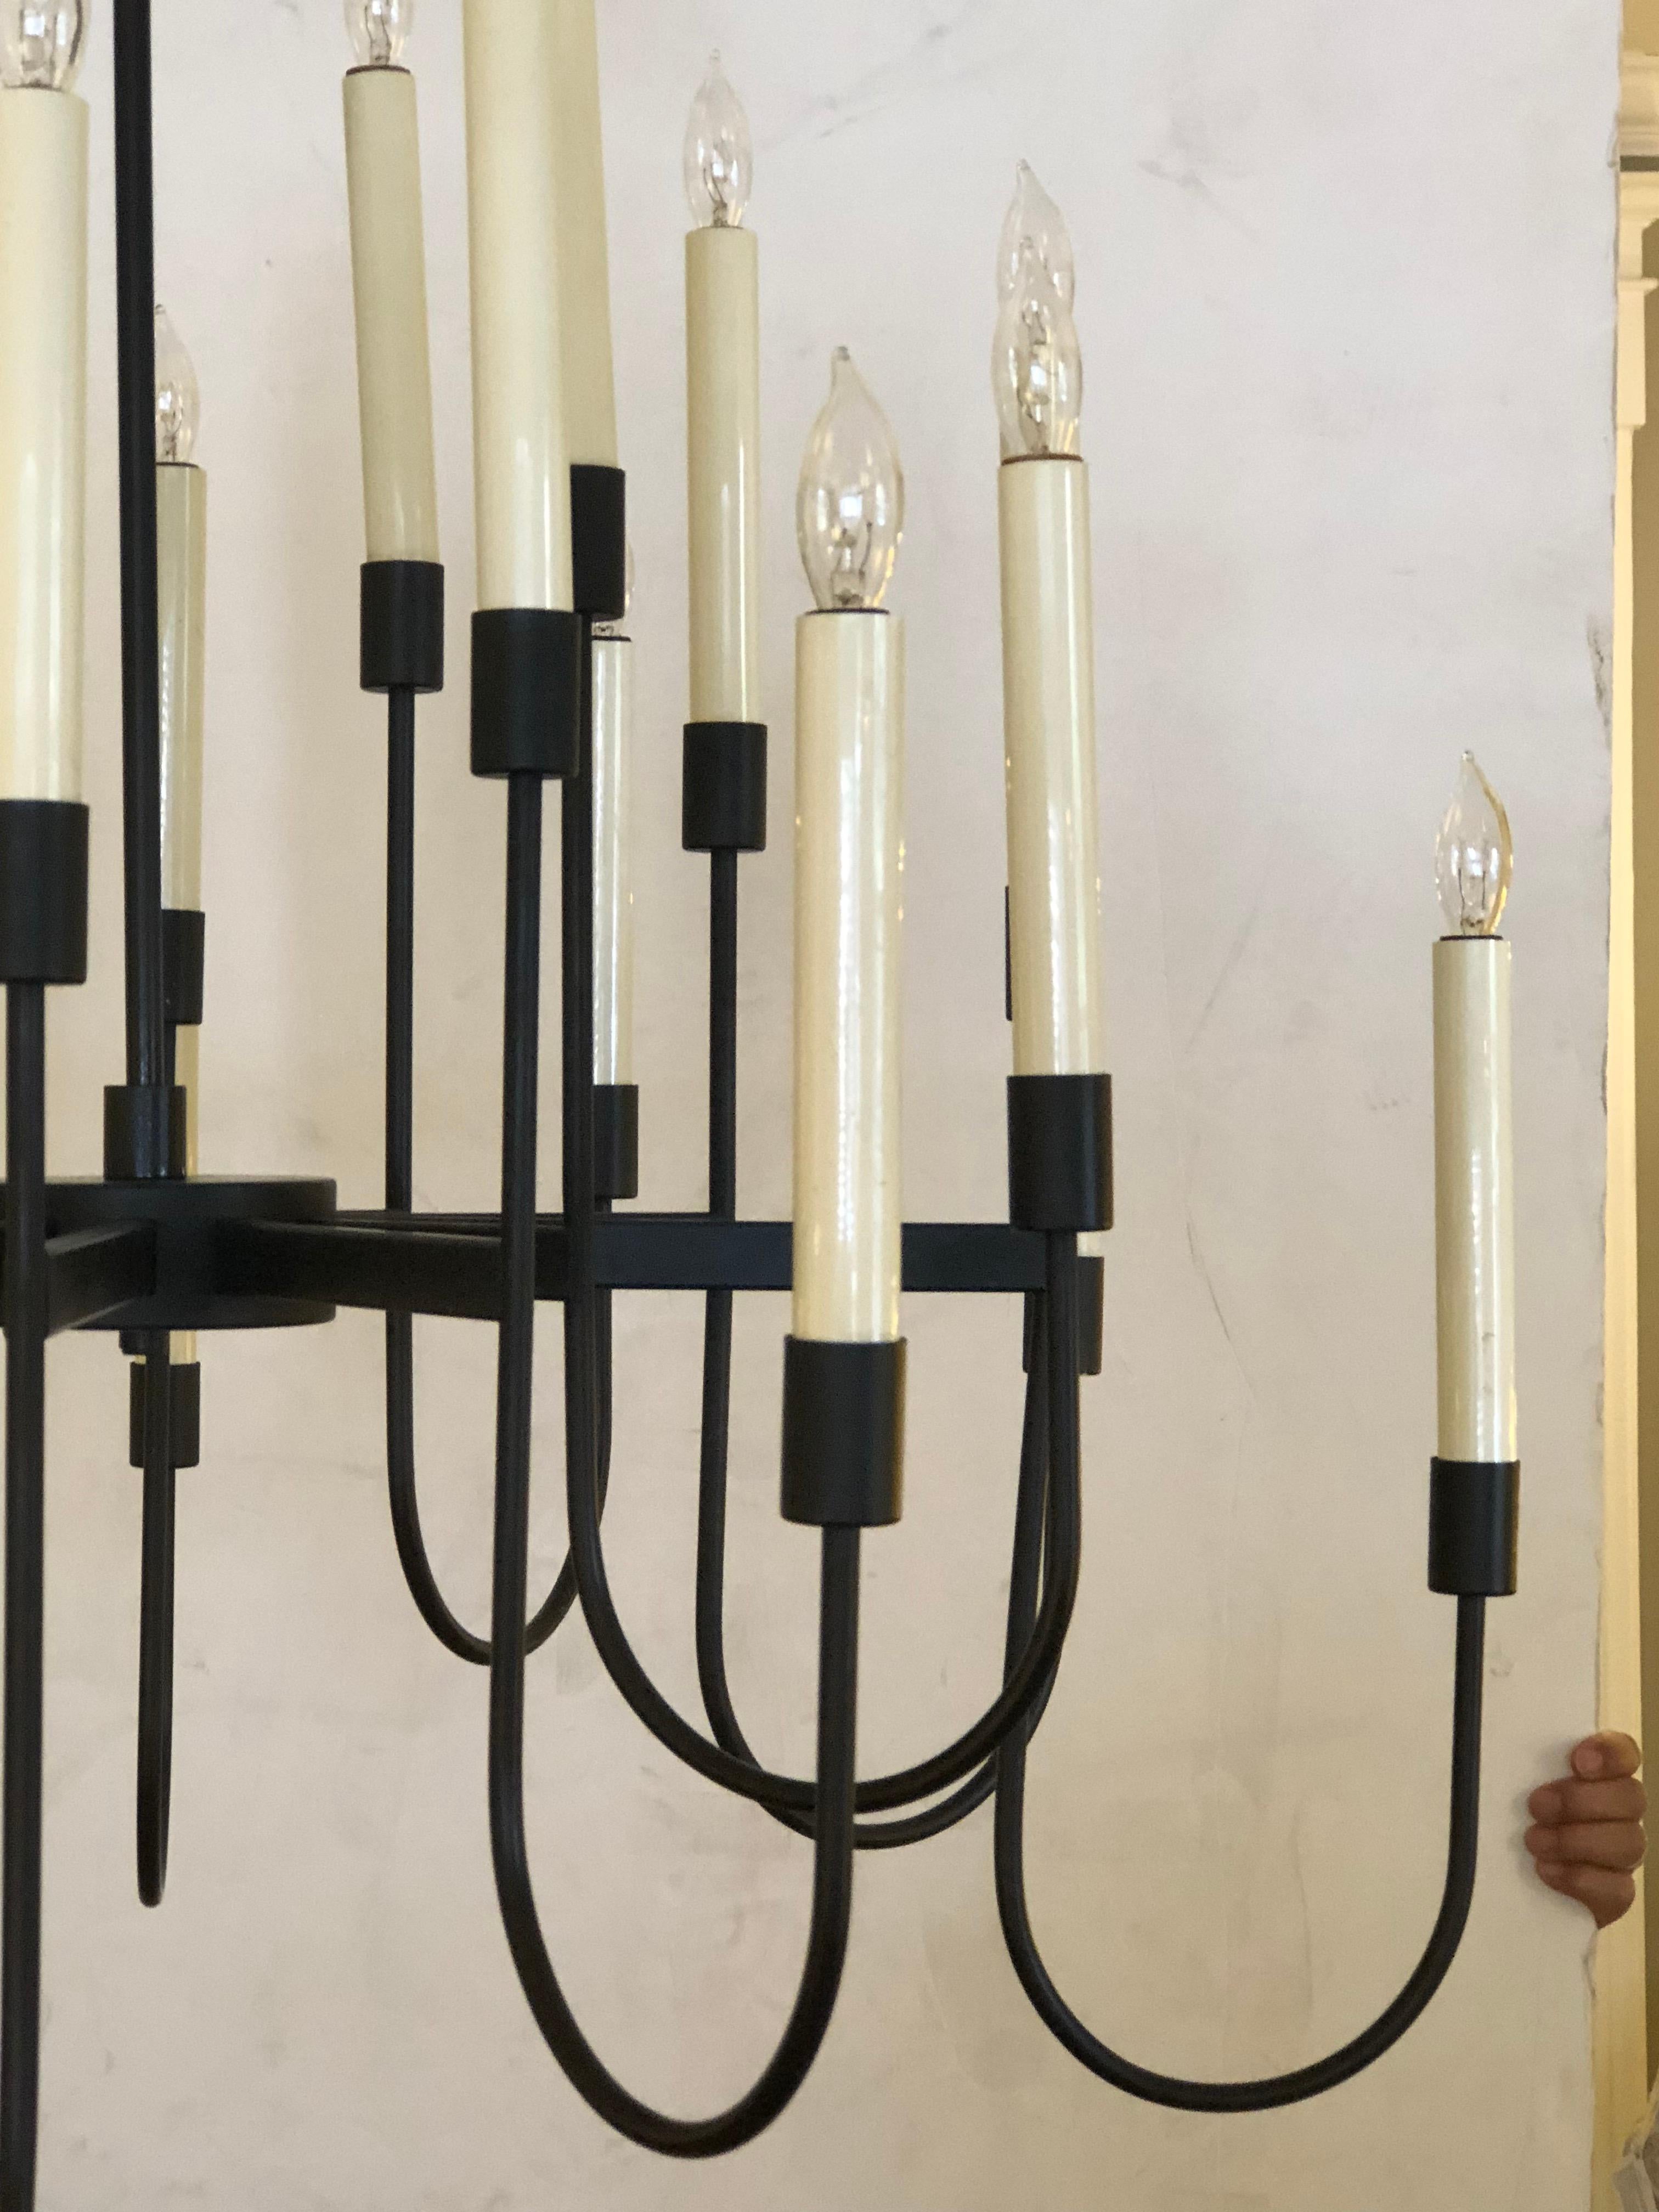 A stylish 1960s black enameled metal 12-arm candelabra style chandelier attributed to Tommi Parzinger; this large ever-so-chic fixture composed of 12 arms with two lights per arm often attributed to Tommi Parzinger and manufactured by Lightolier;